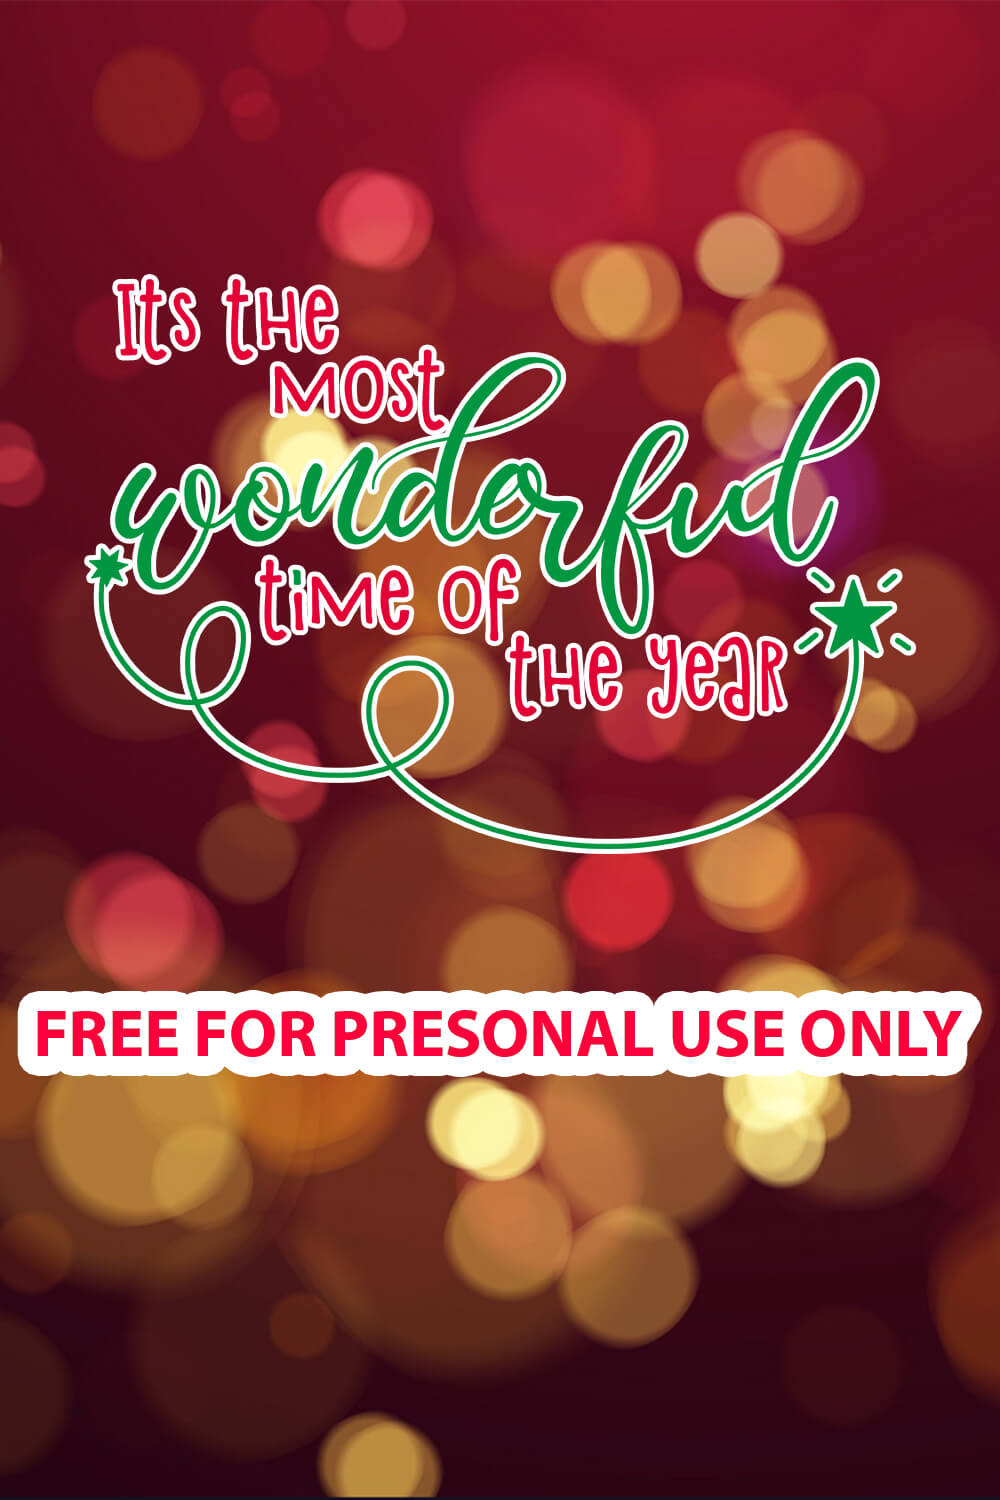 Quote wonderful time of the year free SVG files pinterest image.